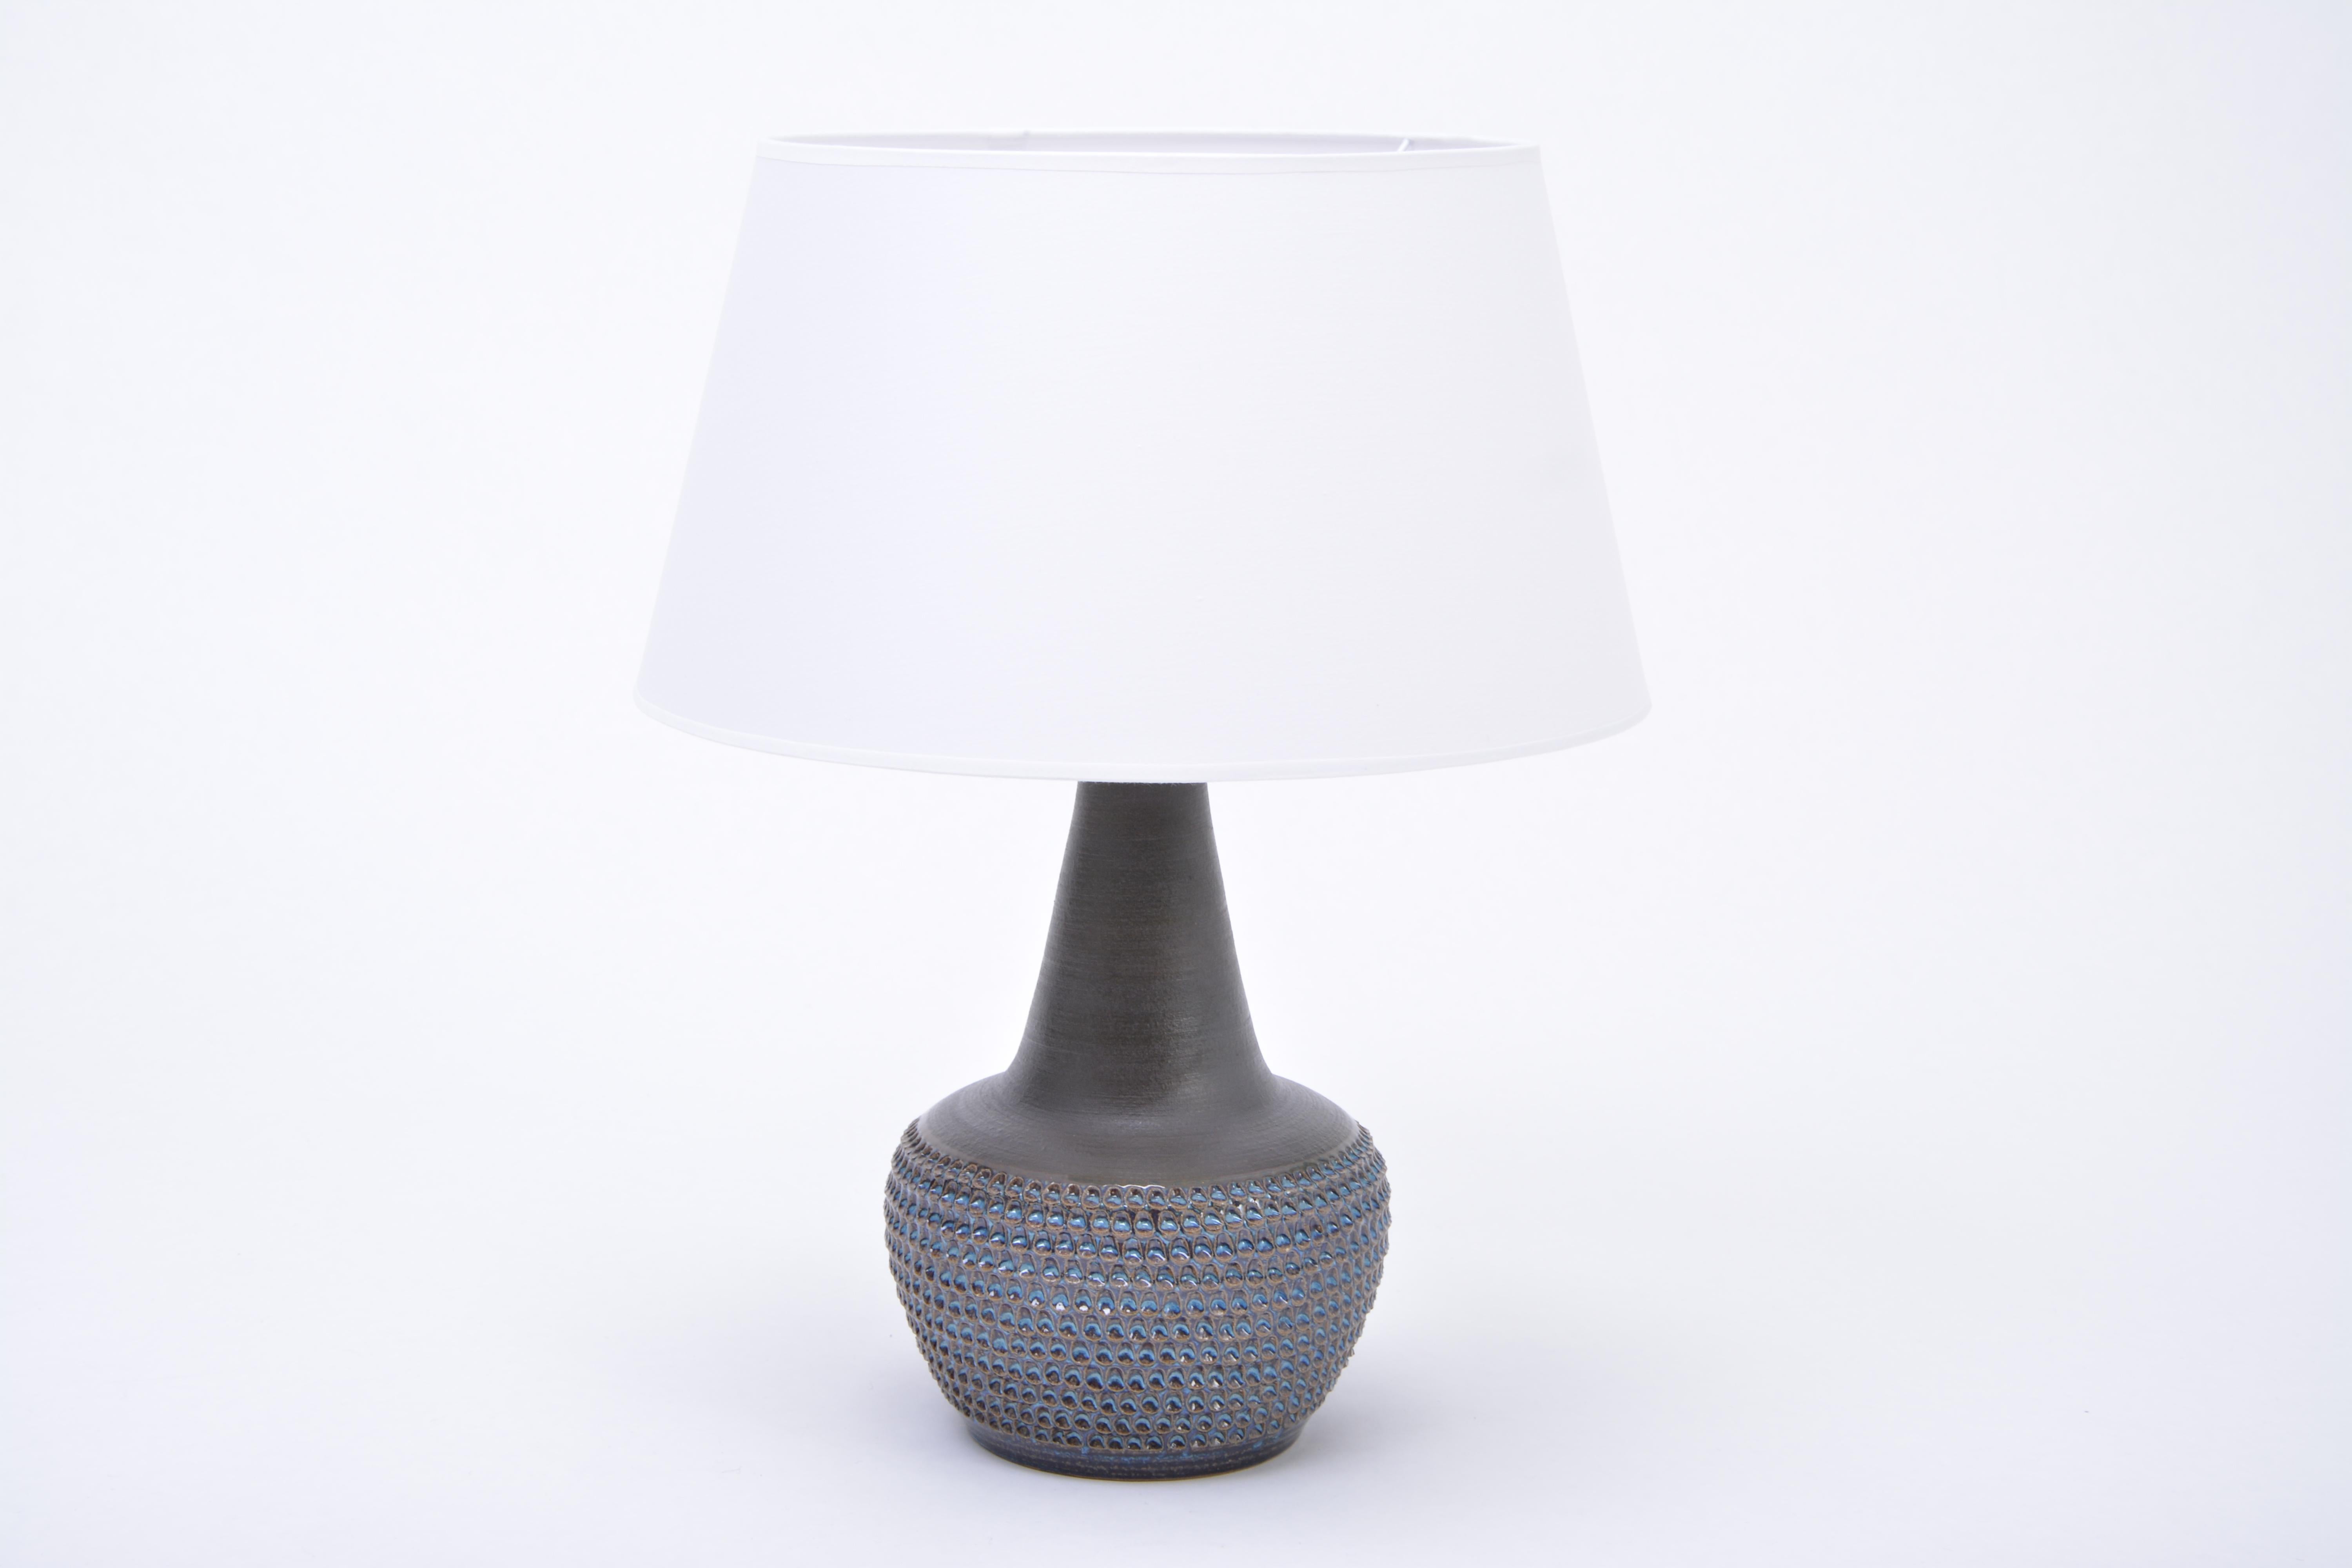 Handmade Blue Danish Mid-Century Stoneware lamp Model 3048 by Soholm
Stunning table lamp handmade of stoneware with ceramic glazing in different tones of blue. Circular pattern to the base of the lamp. Produced by Danish company Soholm. The lamp has